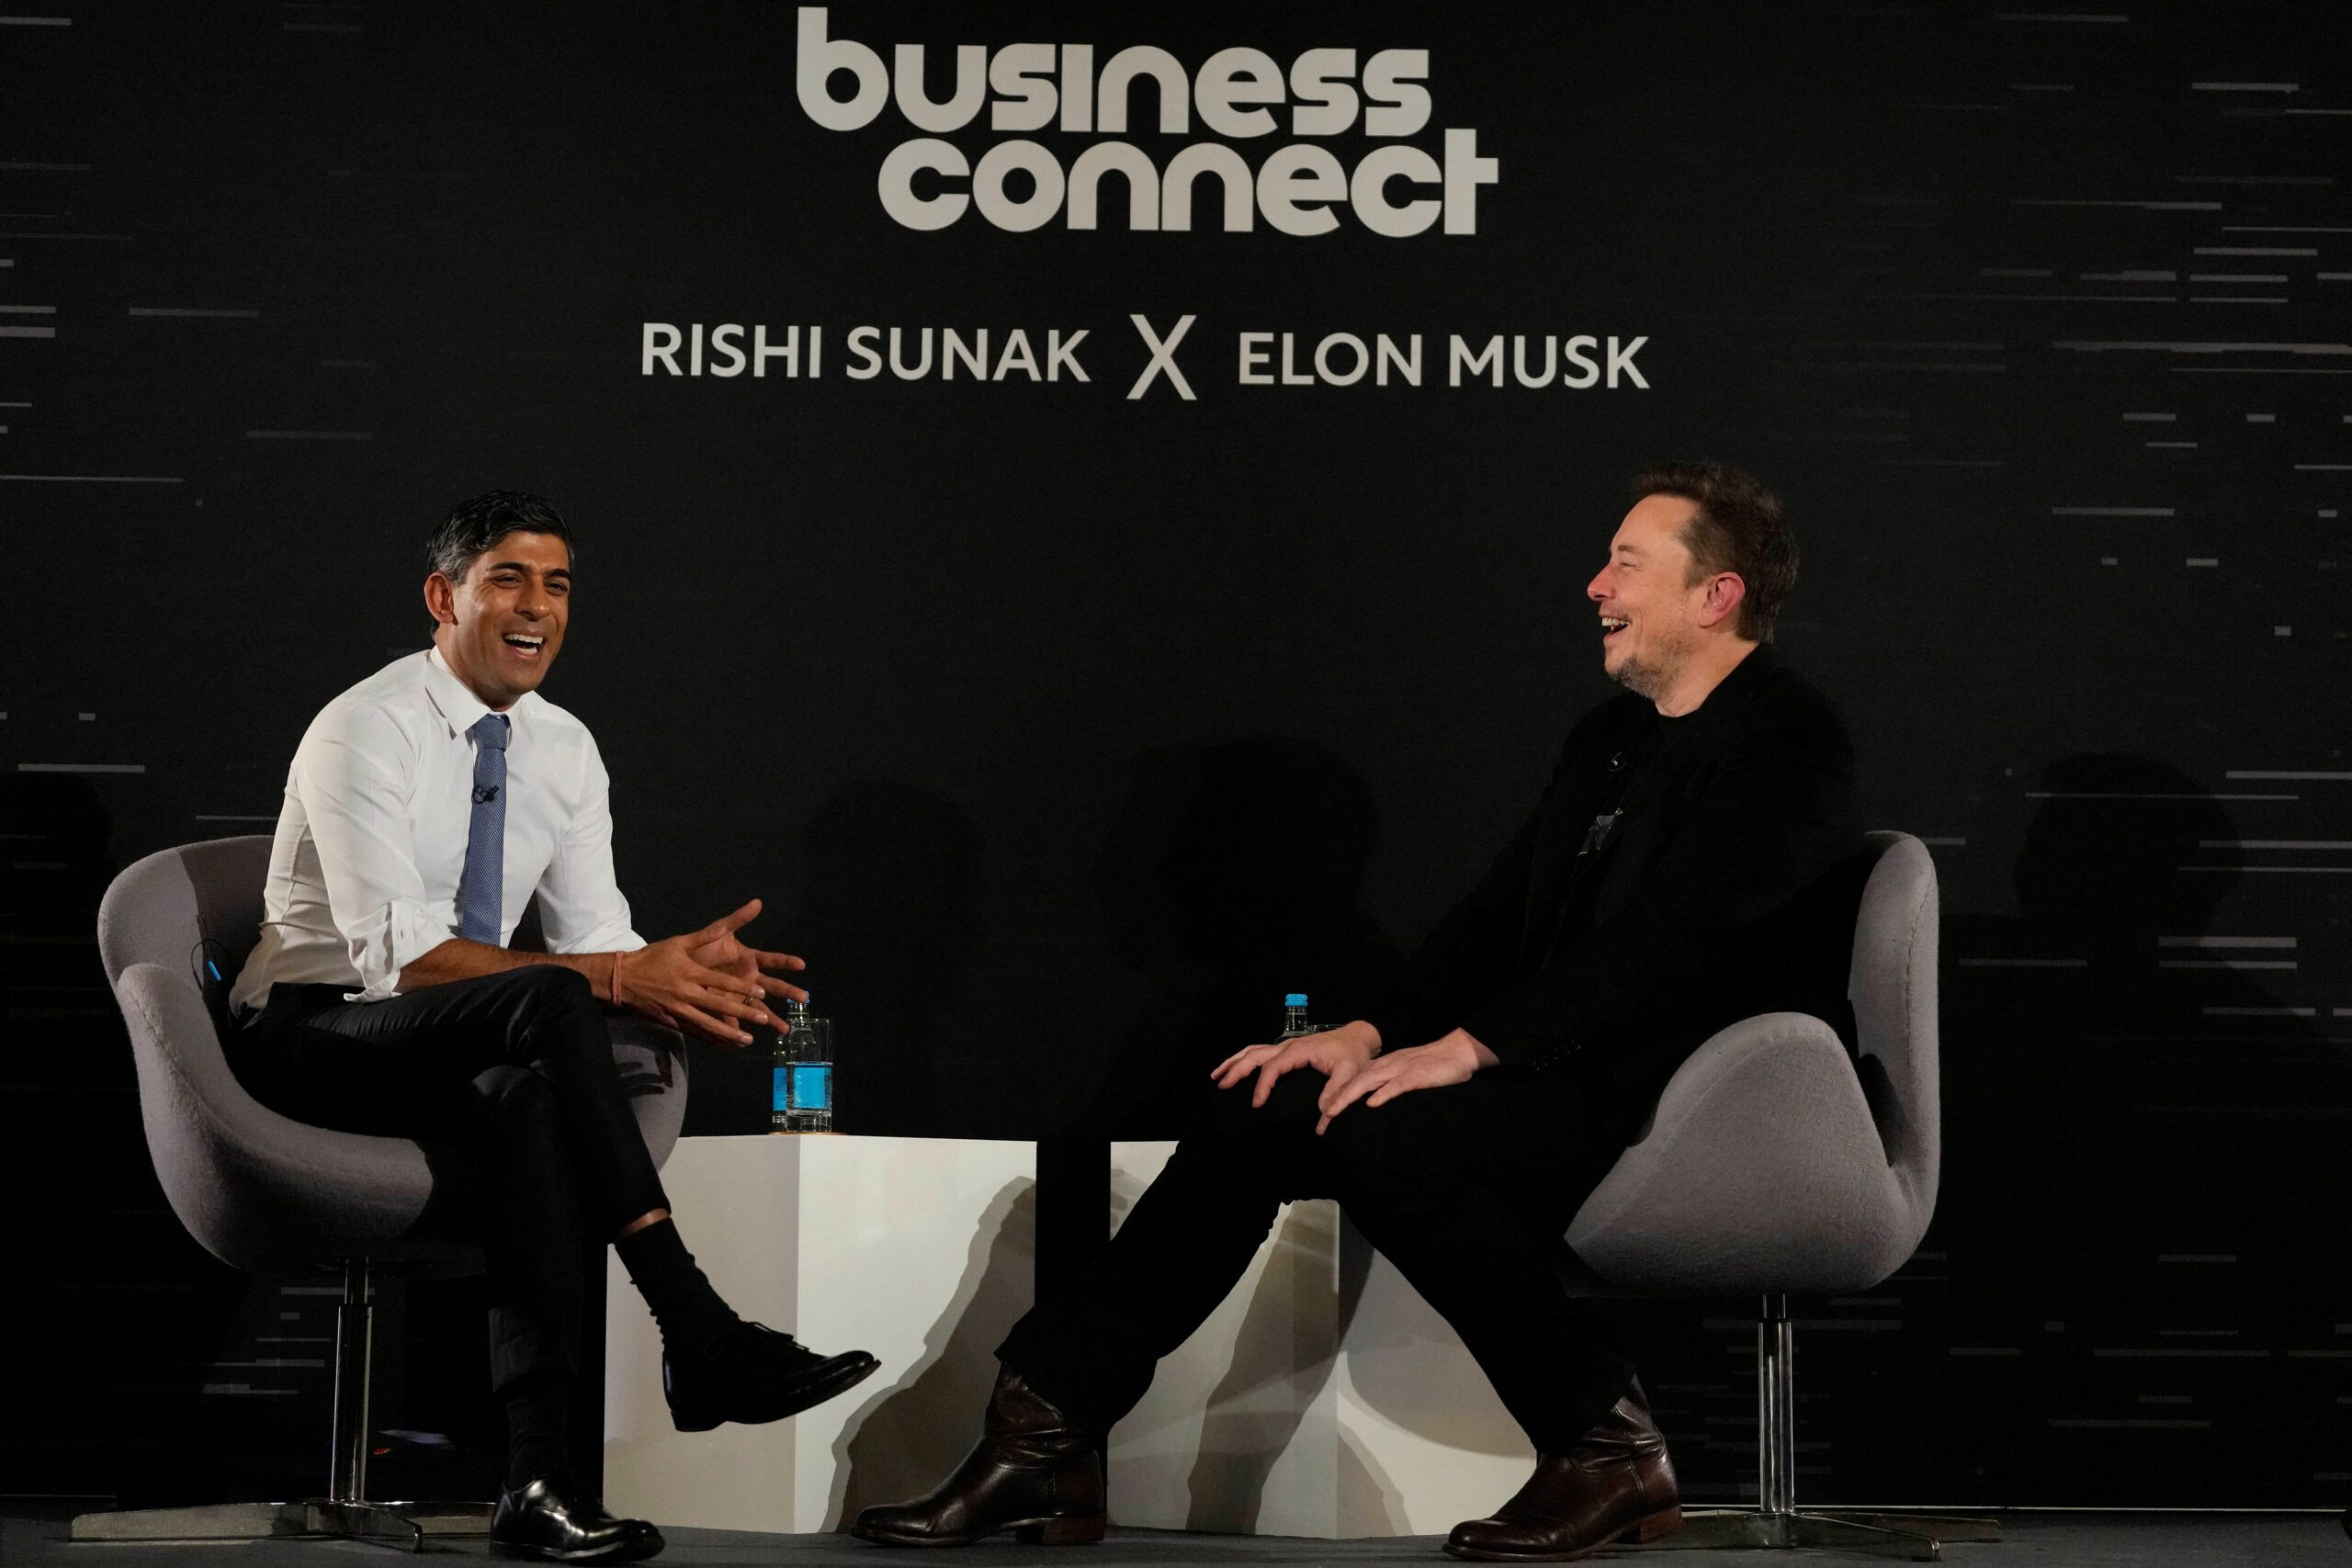 Elon Musk says good for UK, US and China to align on AI safety